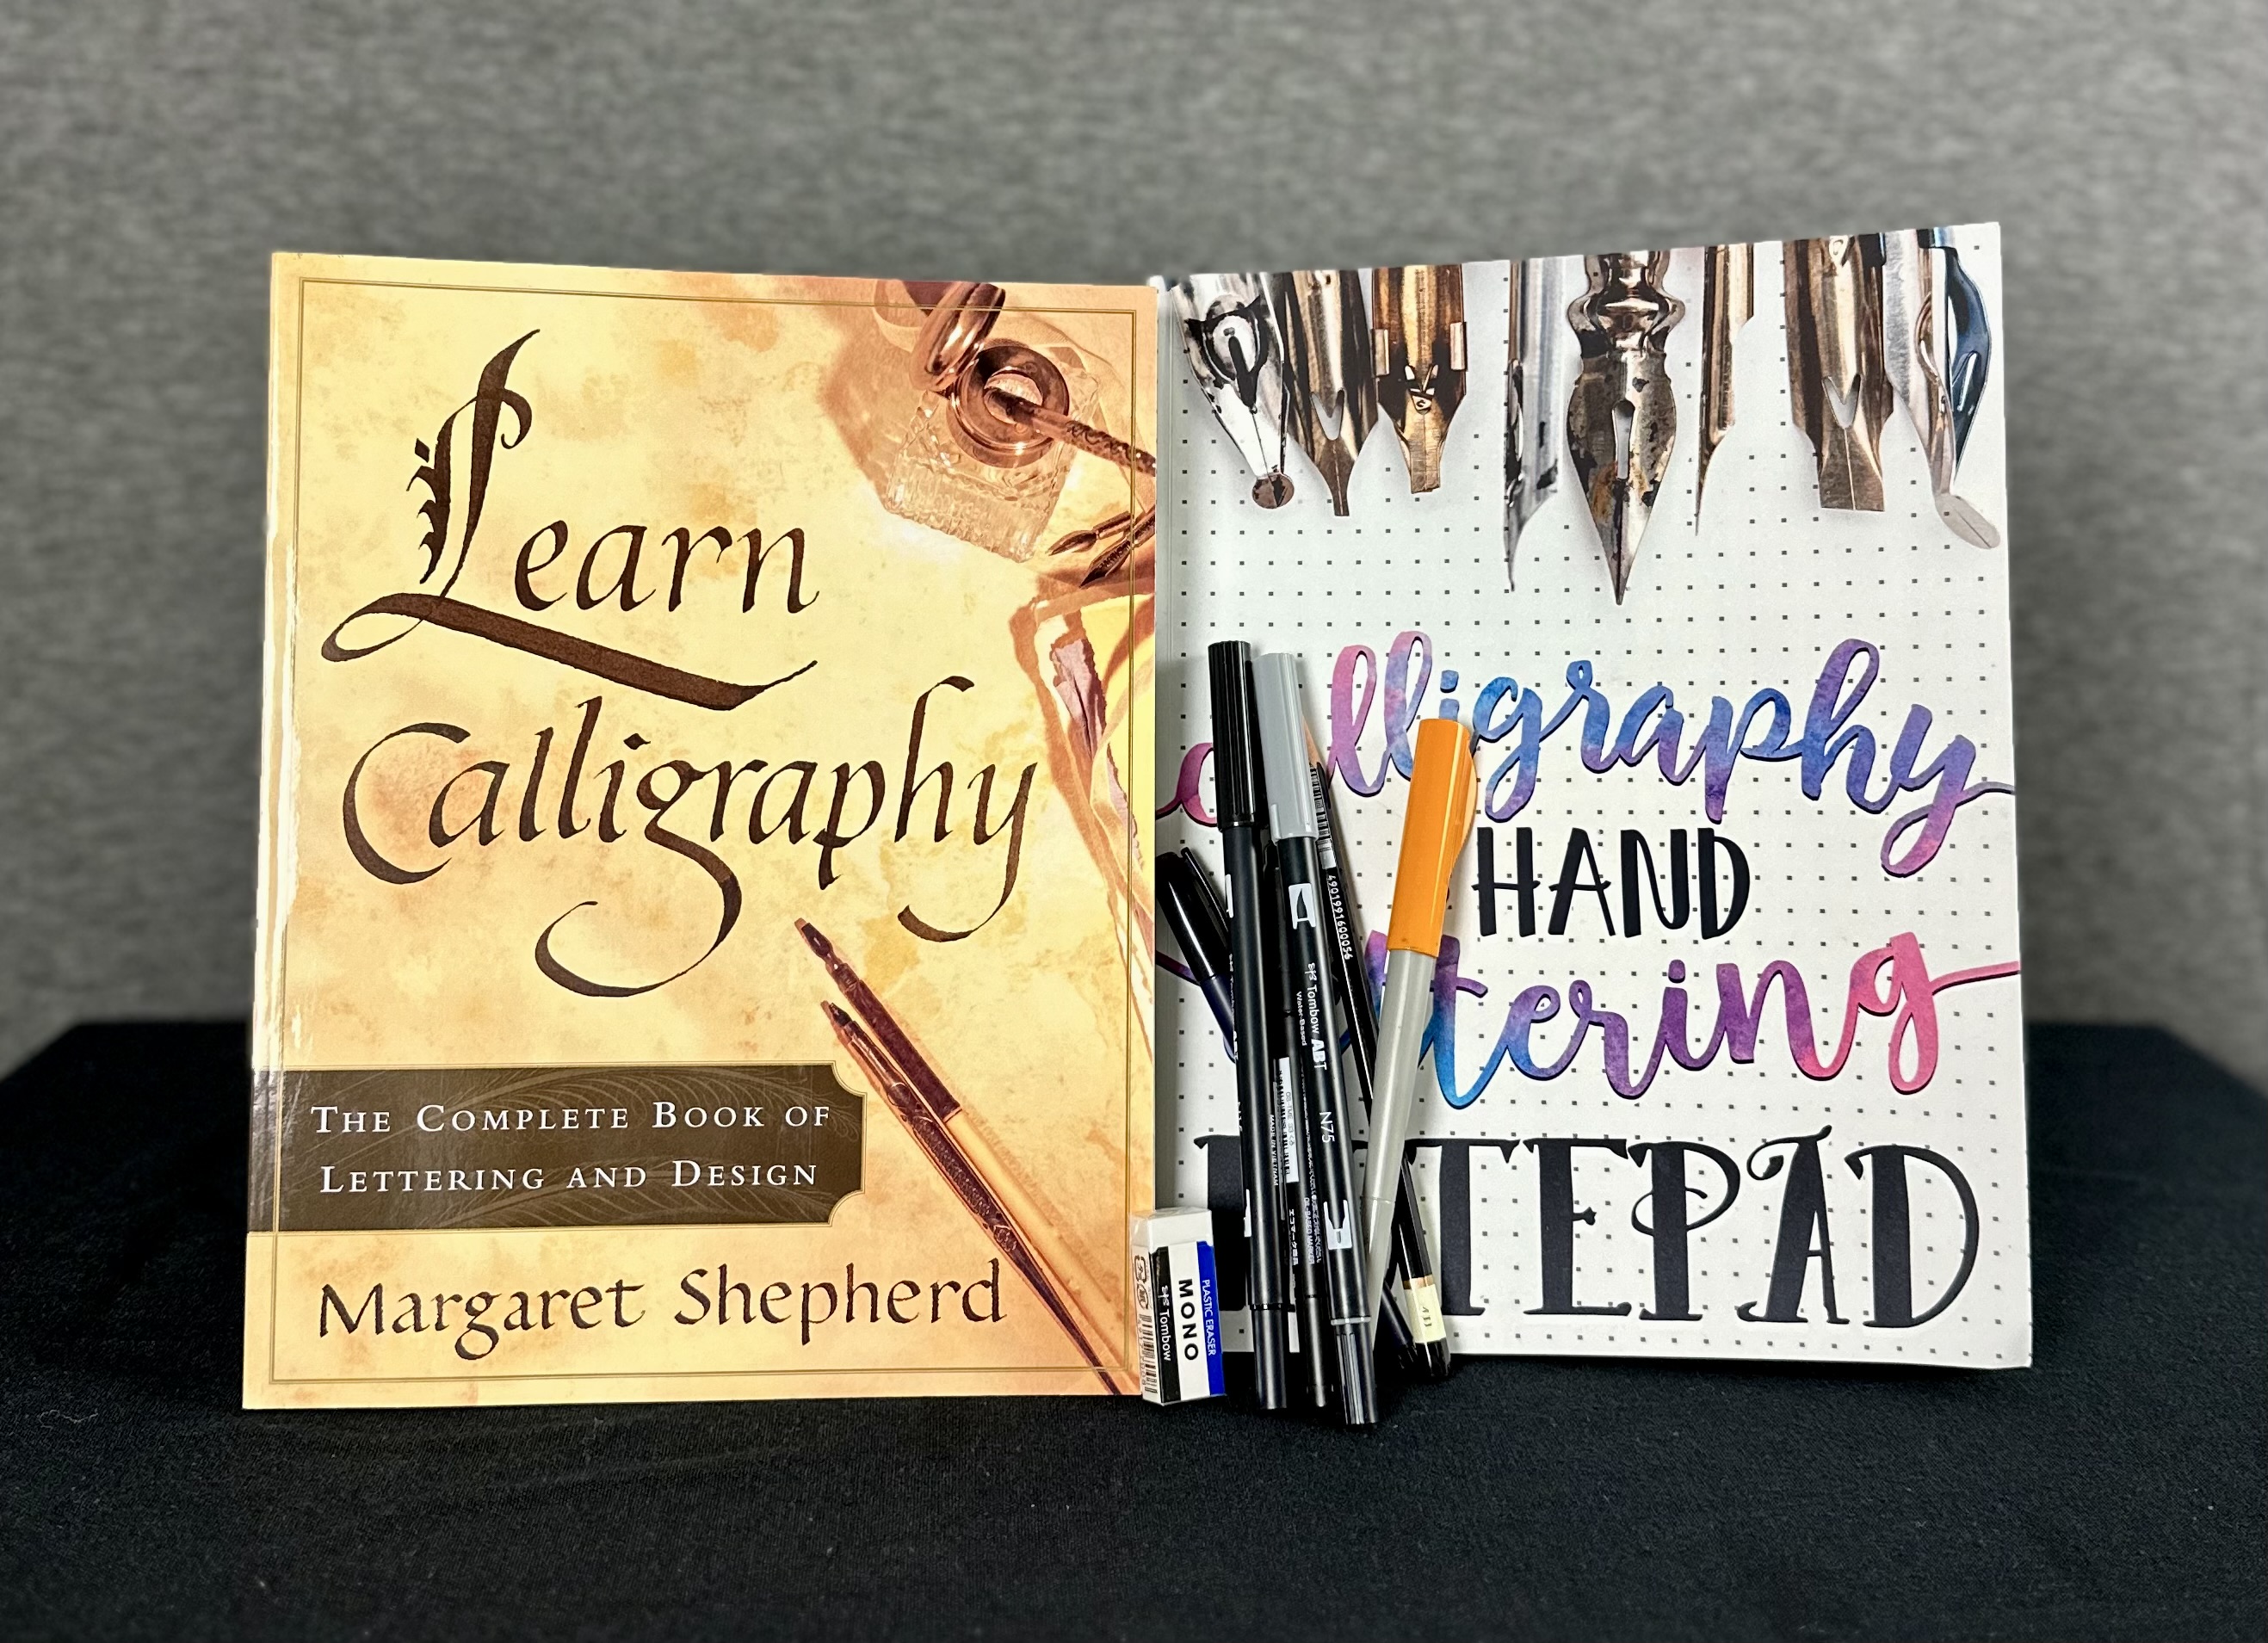 Calligraphy pens and drawing books